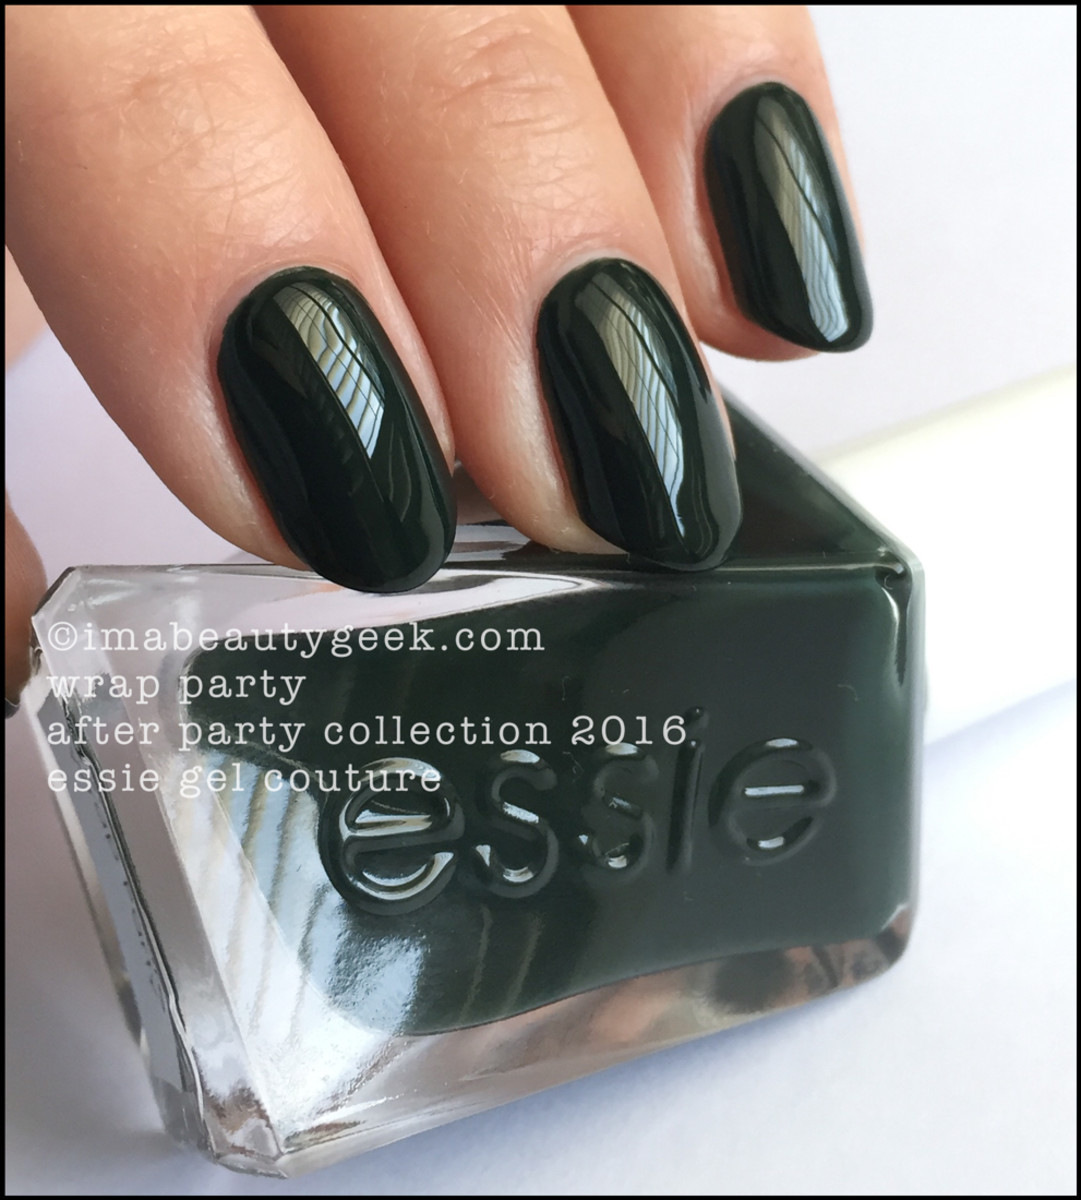 Essie Wrap Party_Essie Gel Couture Swatches Review 2016